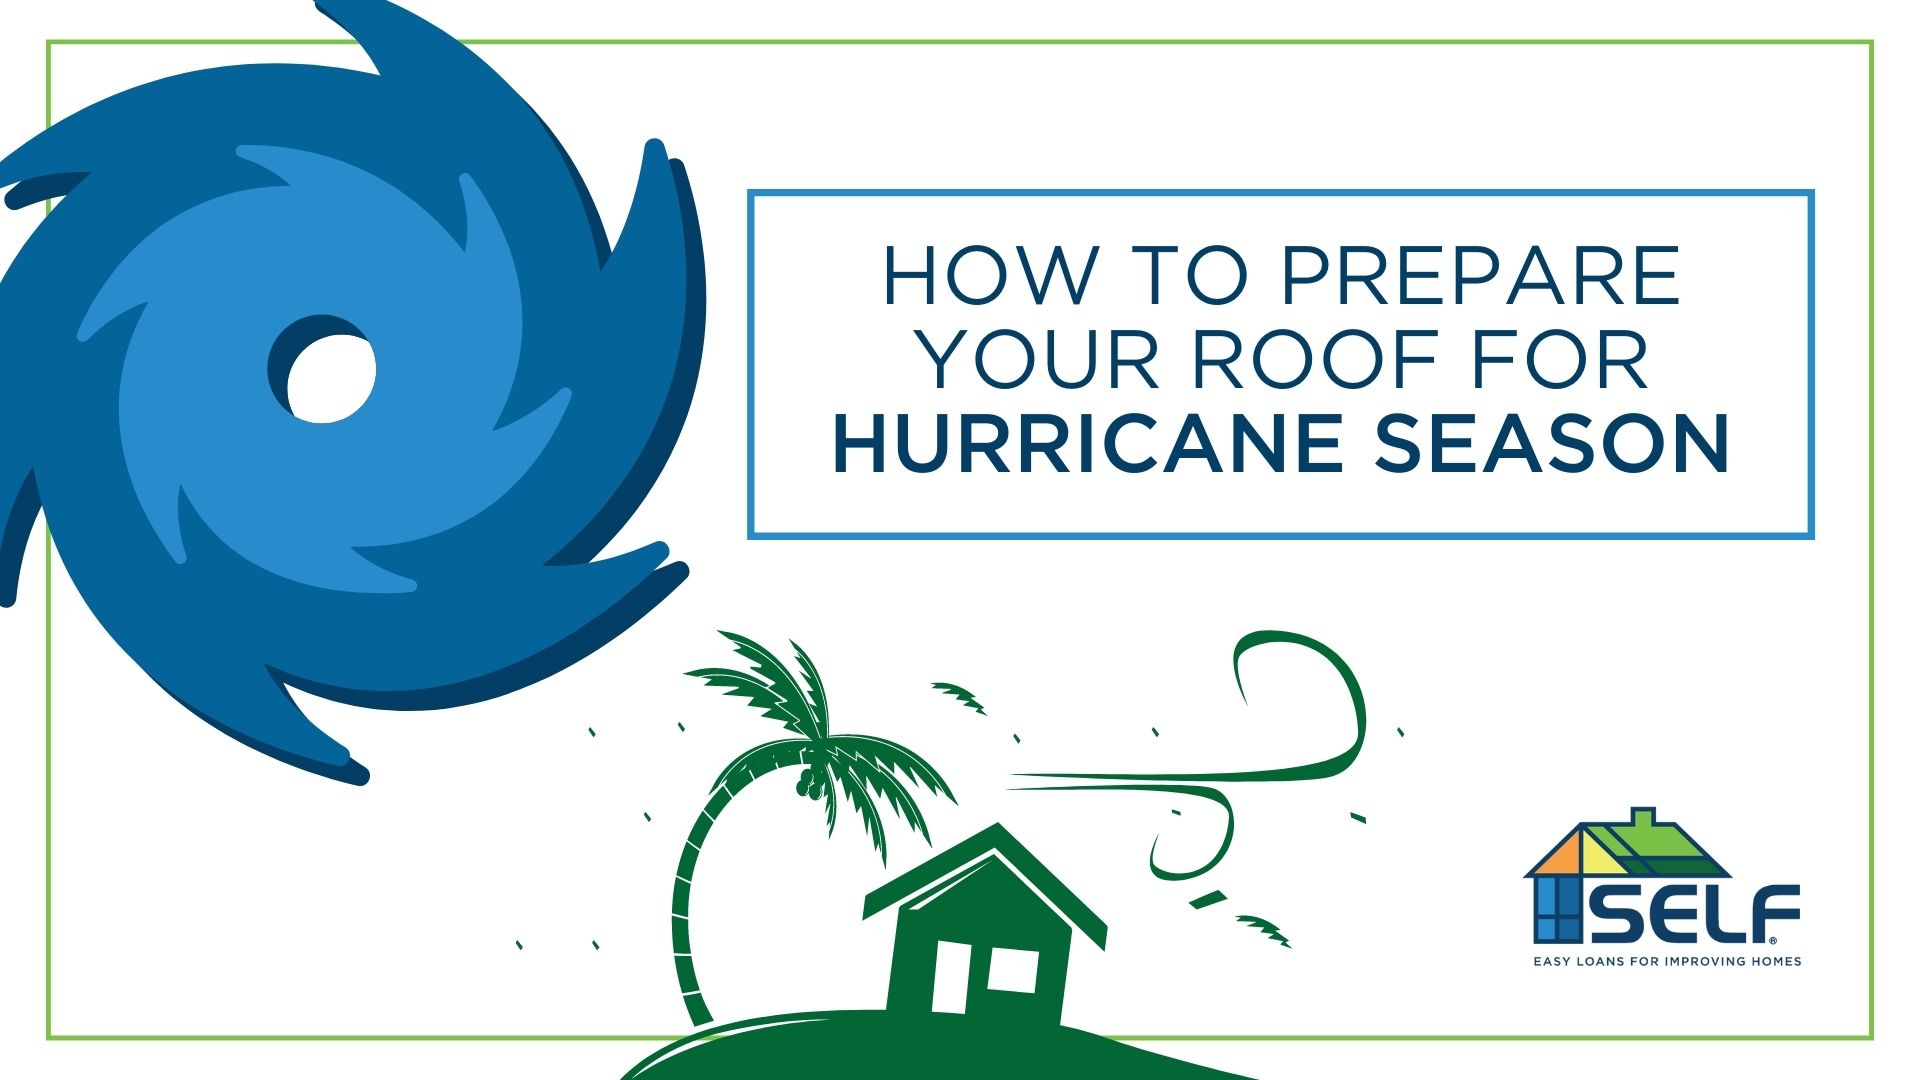 How To Prepare Your Roof For Hurricane Season